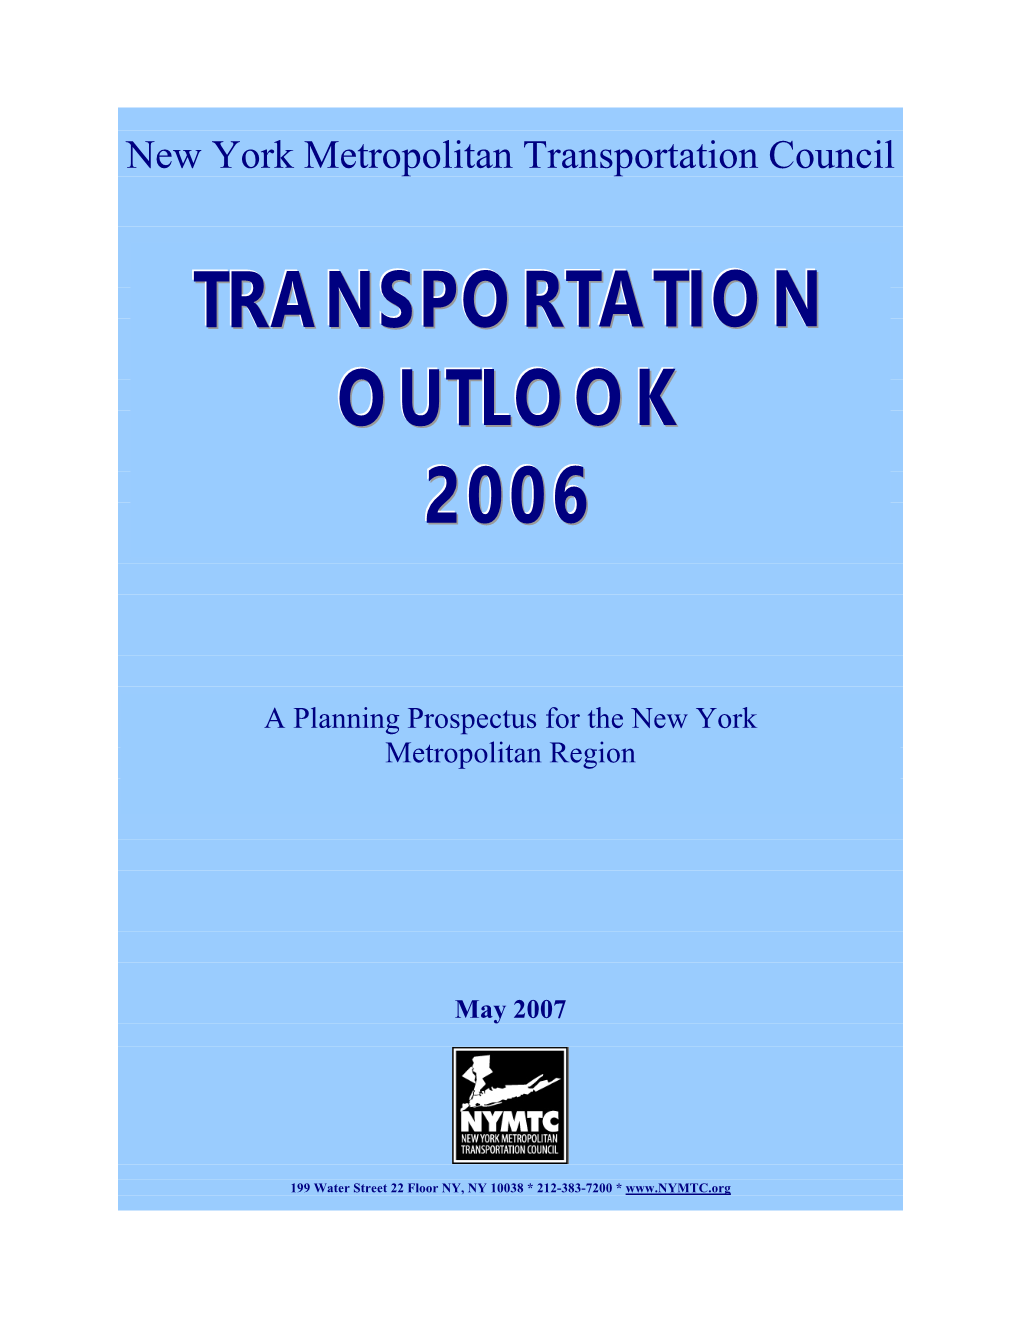 Transportation Outlook 2006 Is a Planning Prospectus Which Is Intended to Guide the About NYMTC Annual Preparation of NYMTC’S Work Program